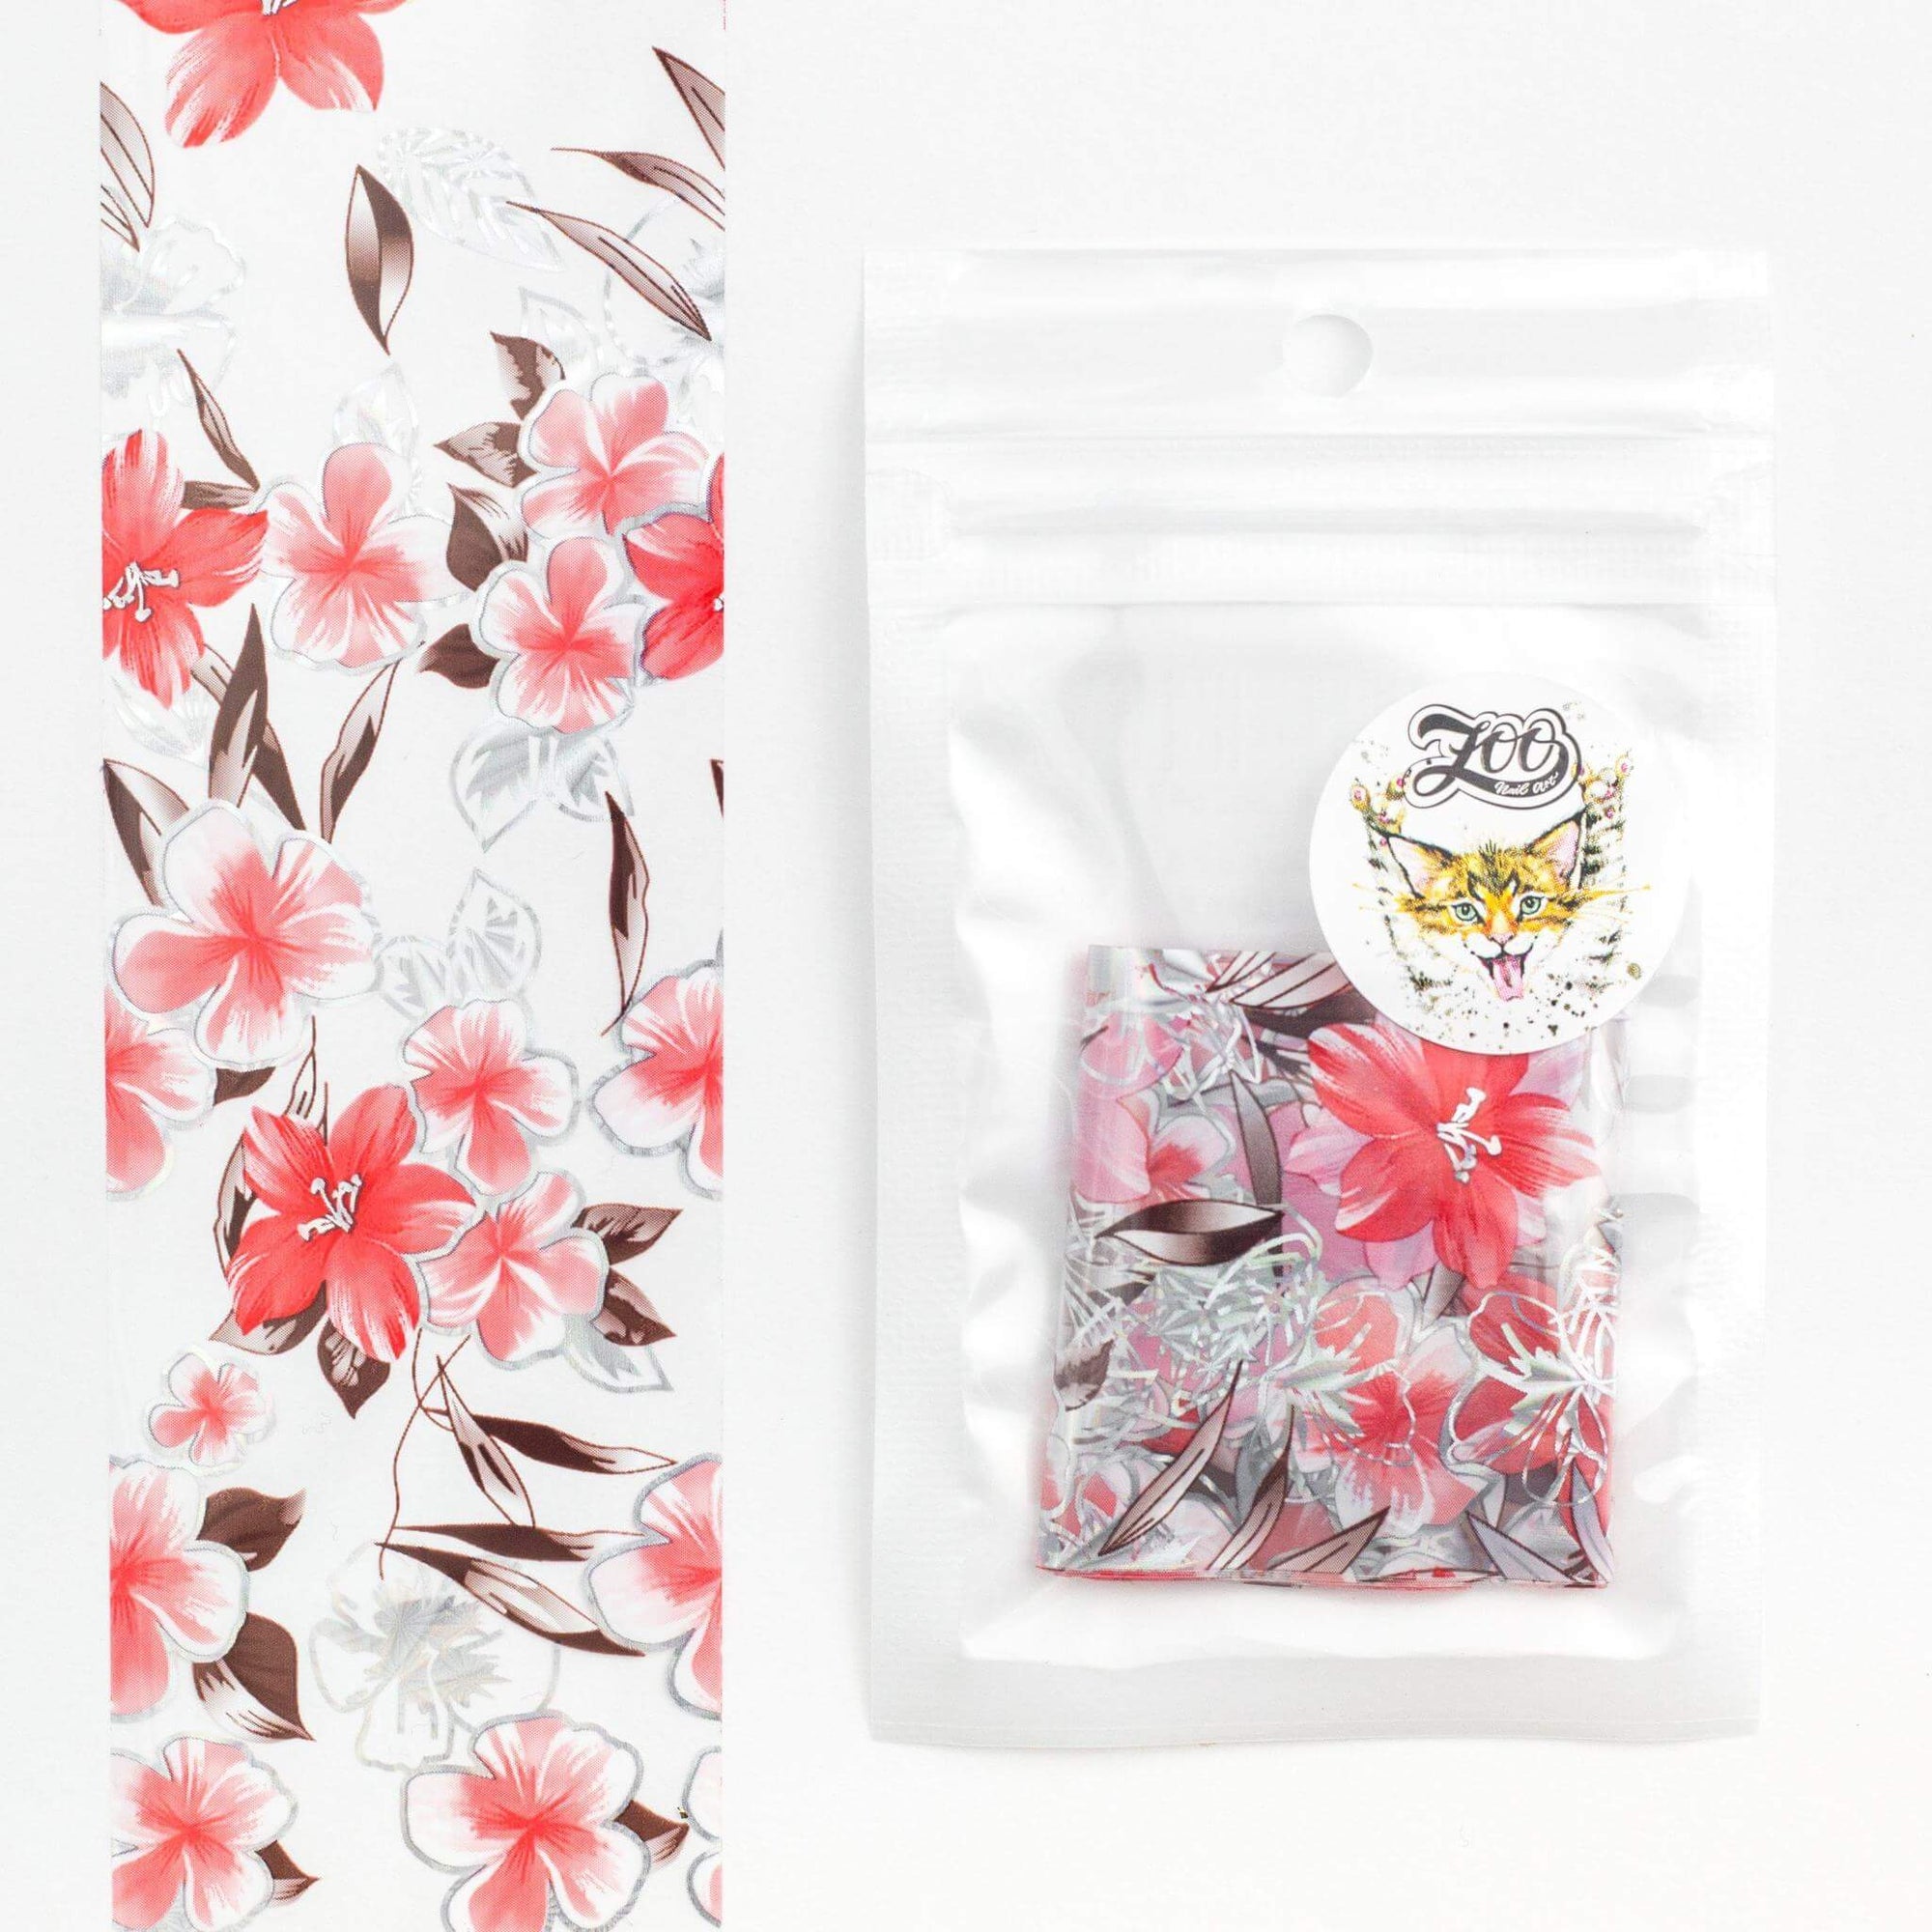 Zoo Nail Art Transfer foil- Red Florals